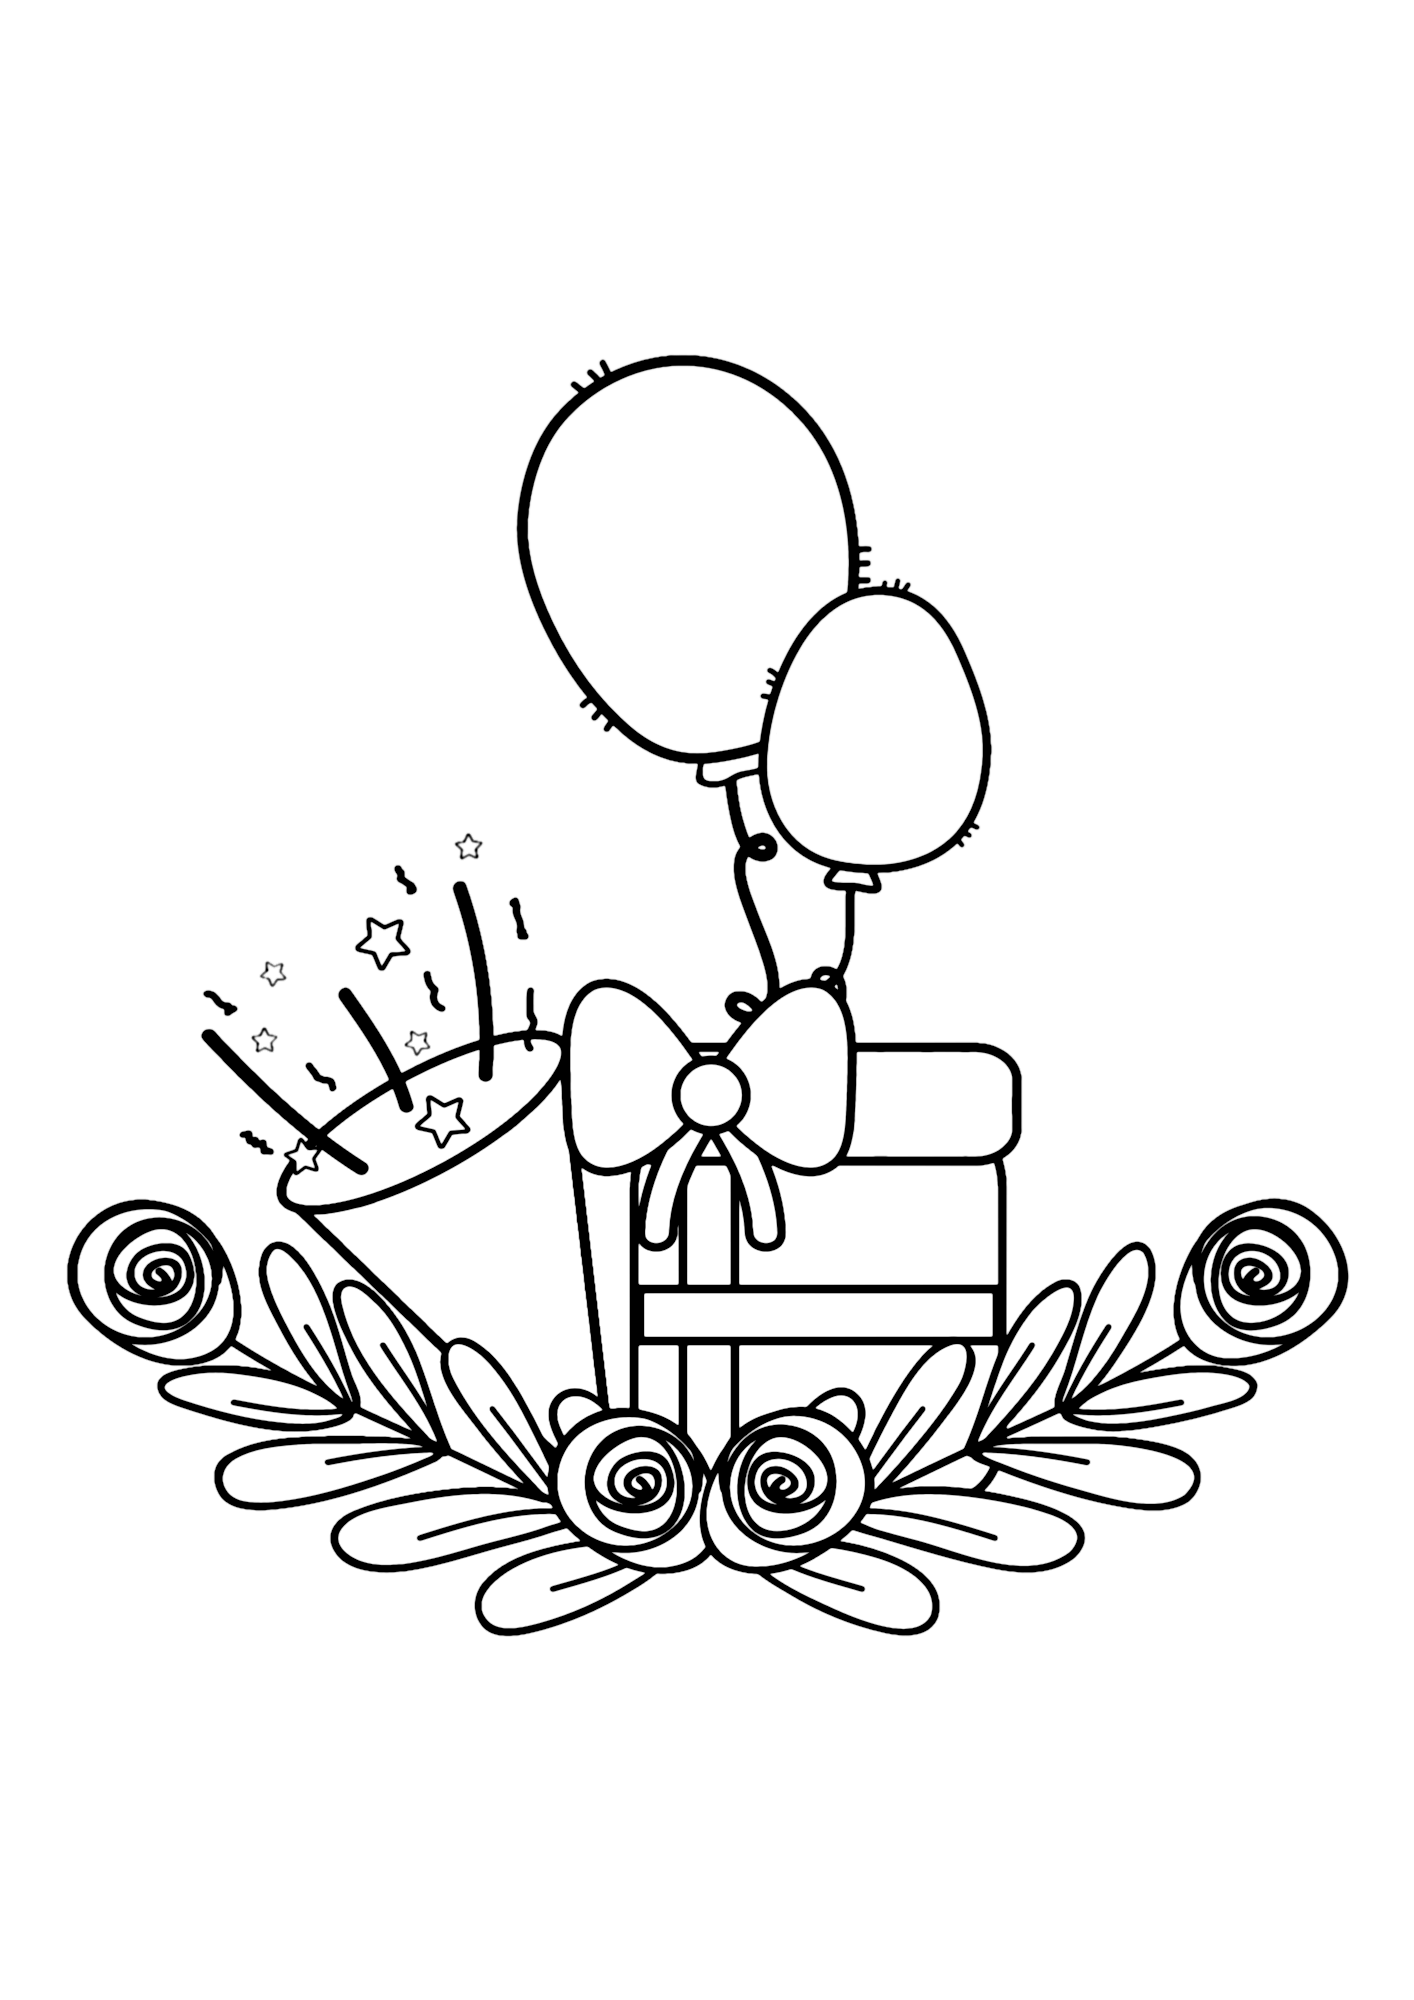 Happy Birthday Cartoons Gifts Coloring Page